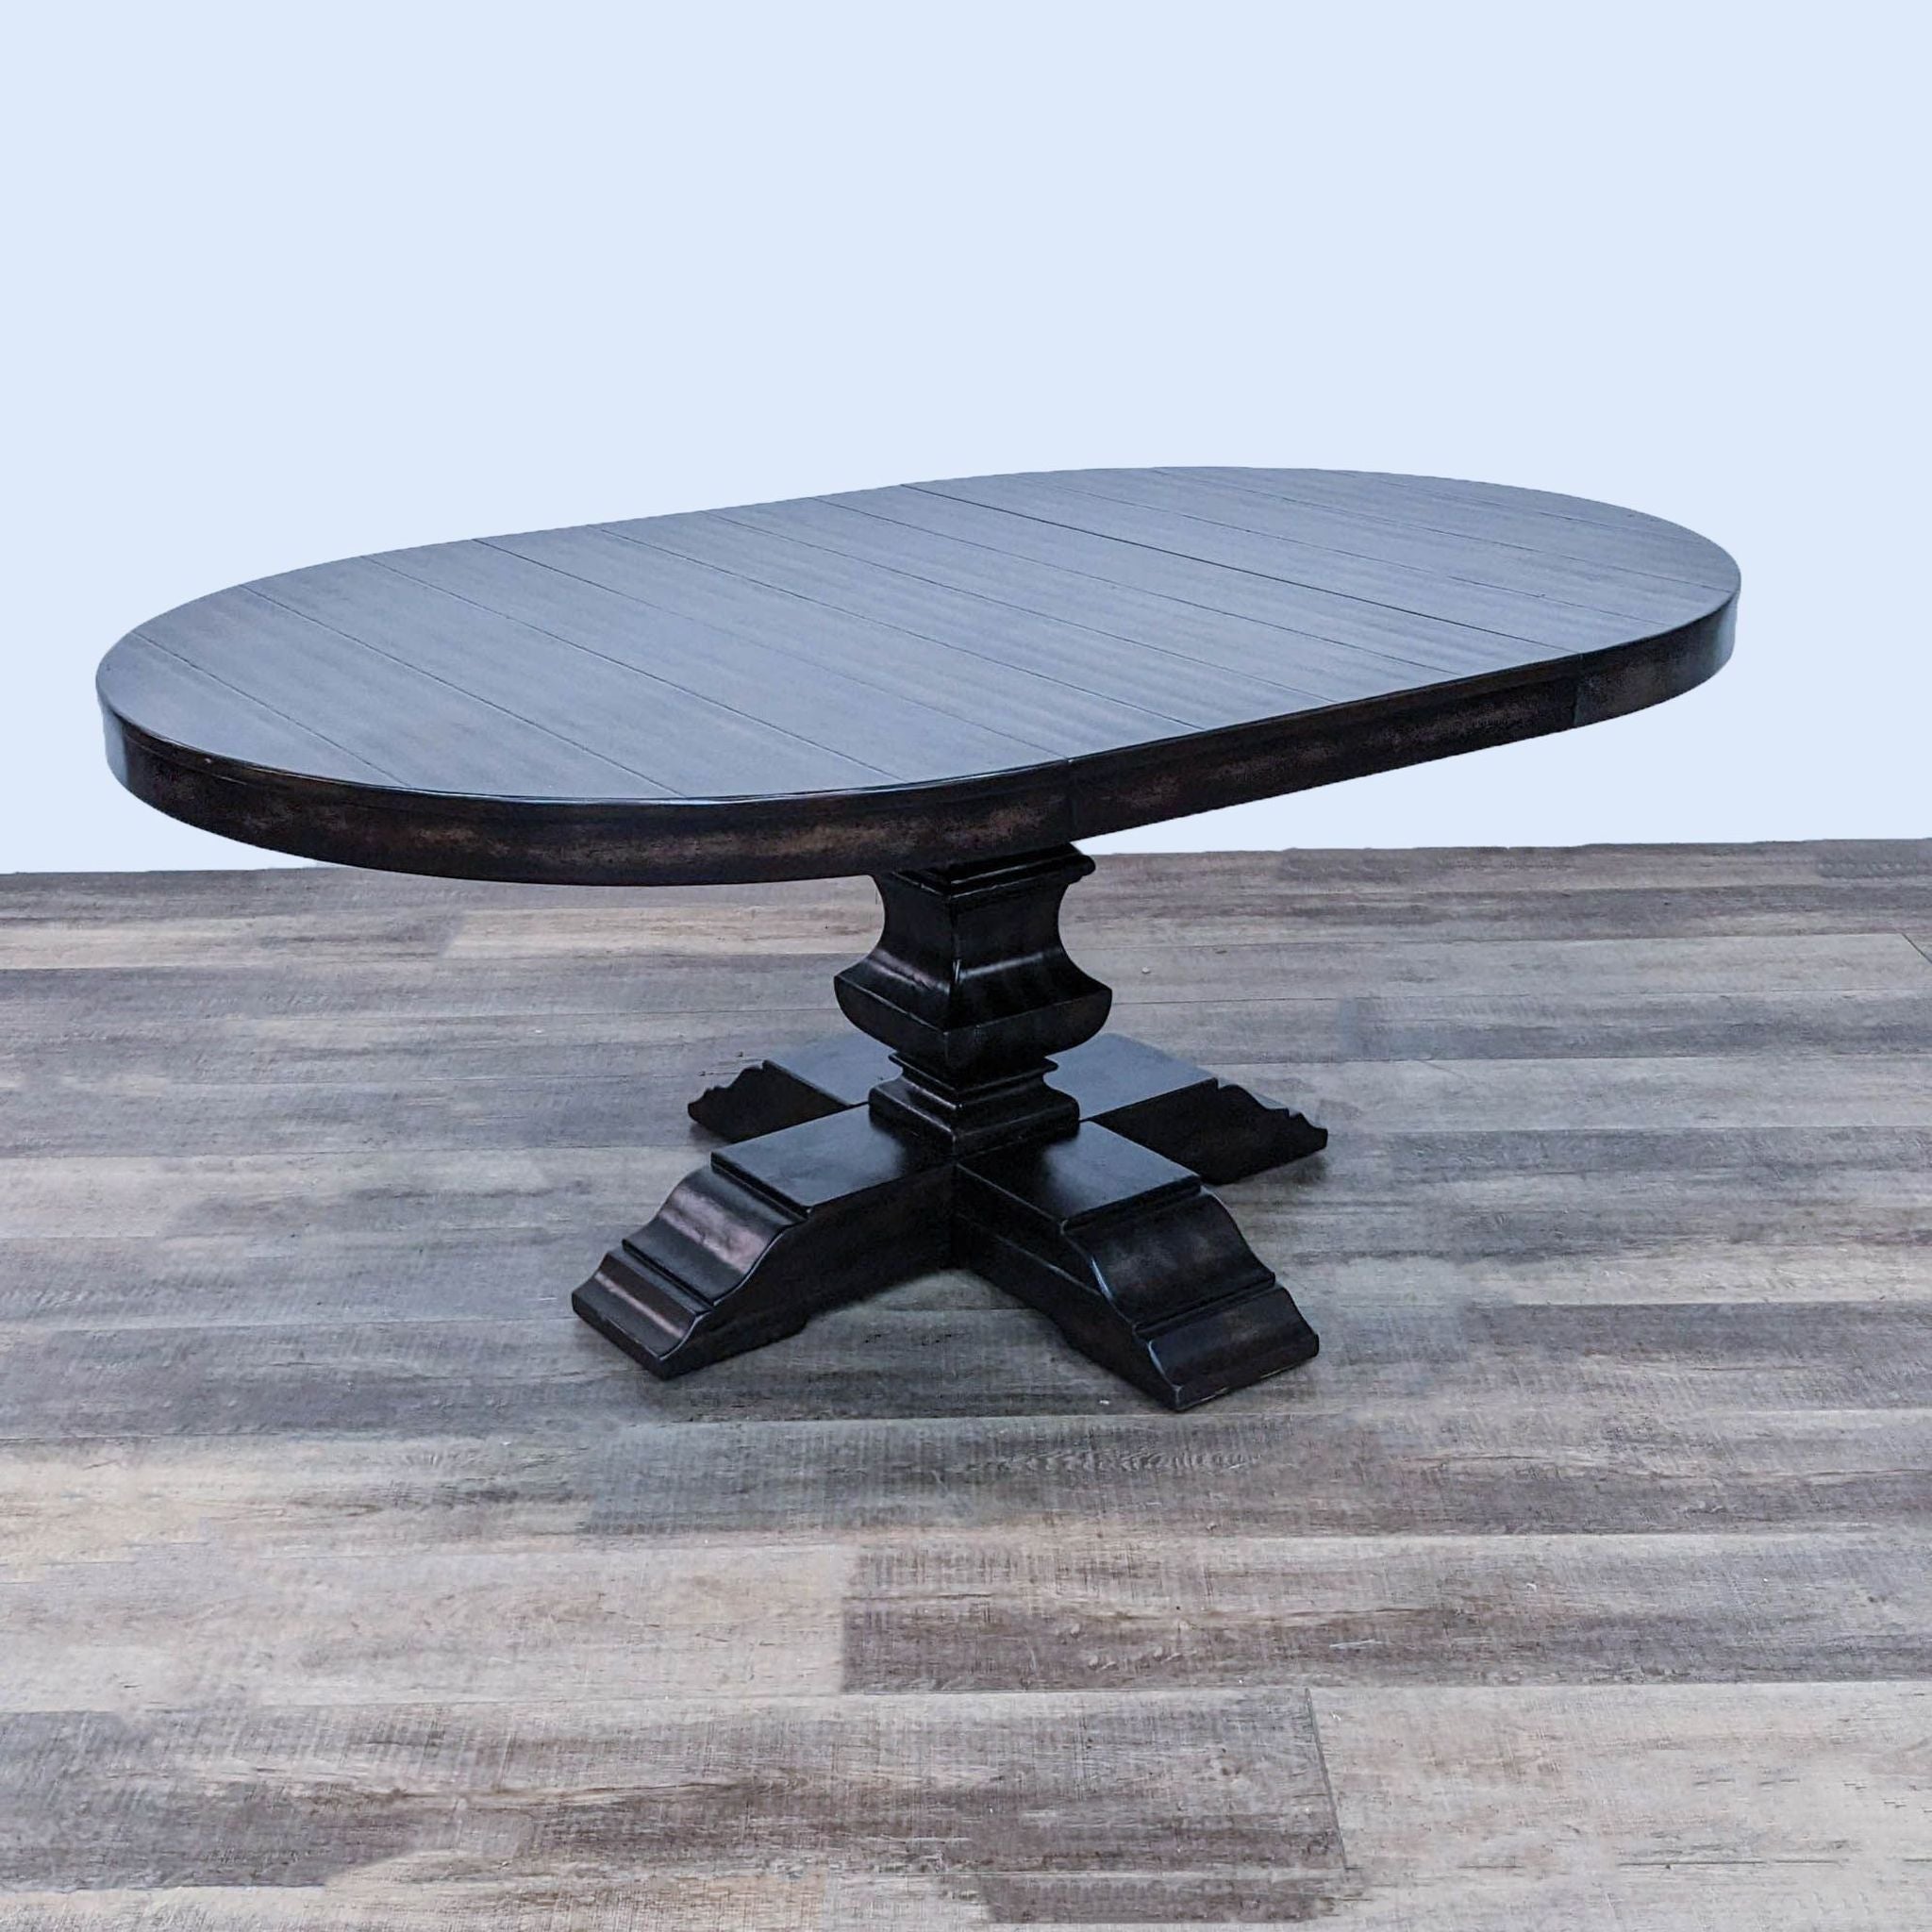 Round planked poplar dining table by Pottery Barn, finished in Alfresco Brown, with a baluster pedestal base on a wooden floor.